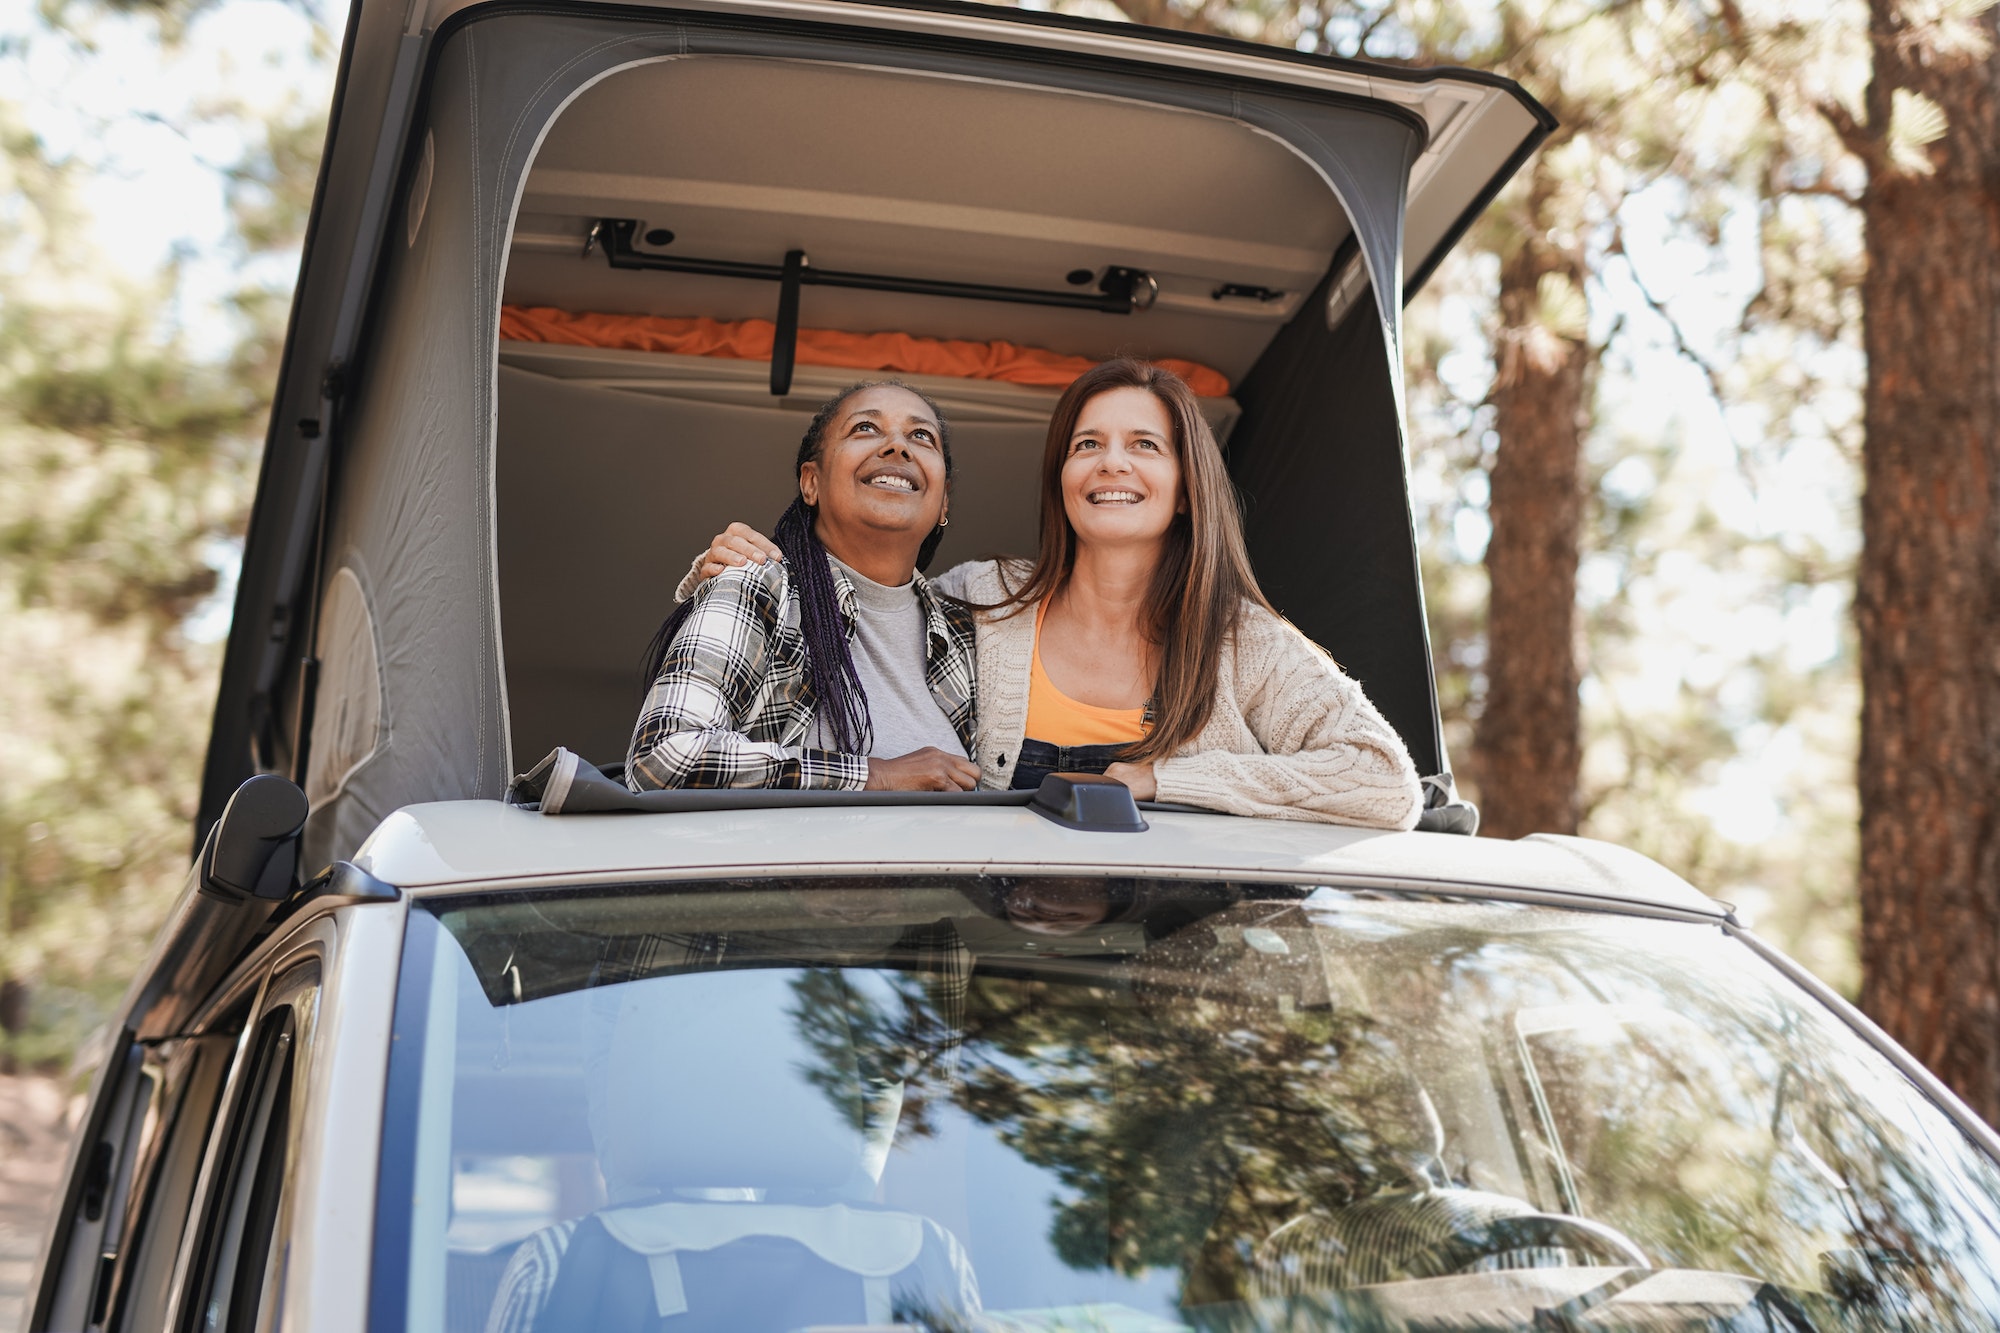 https://www.muchoneumatico.com/blog/wp-content/uploads/2022/10/multiracial-women-enjoy-road-trip-vacation-with-mini-van-camper-and-looking-out-on-roof-top.jpg